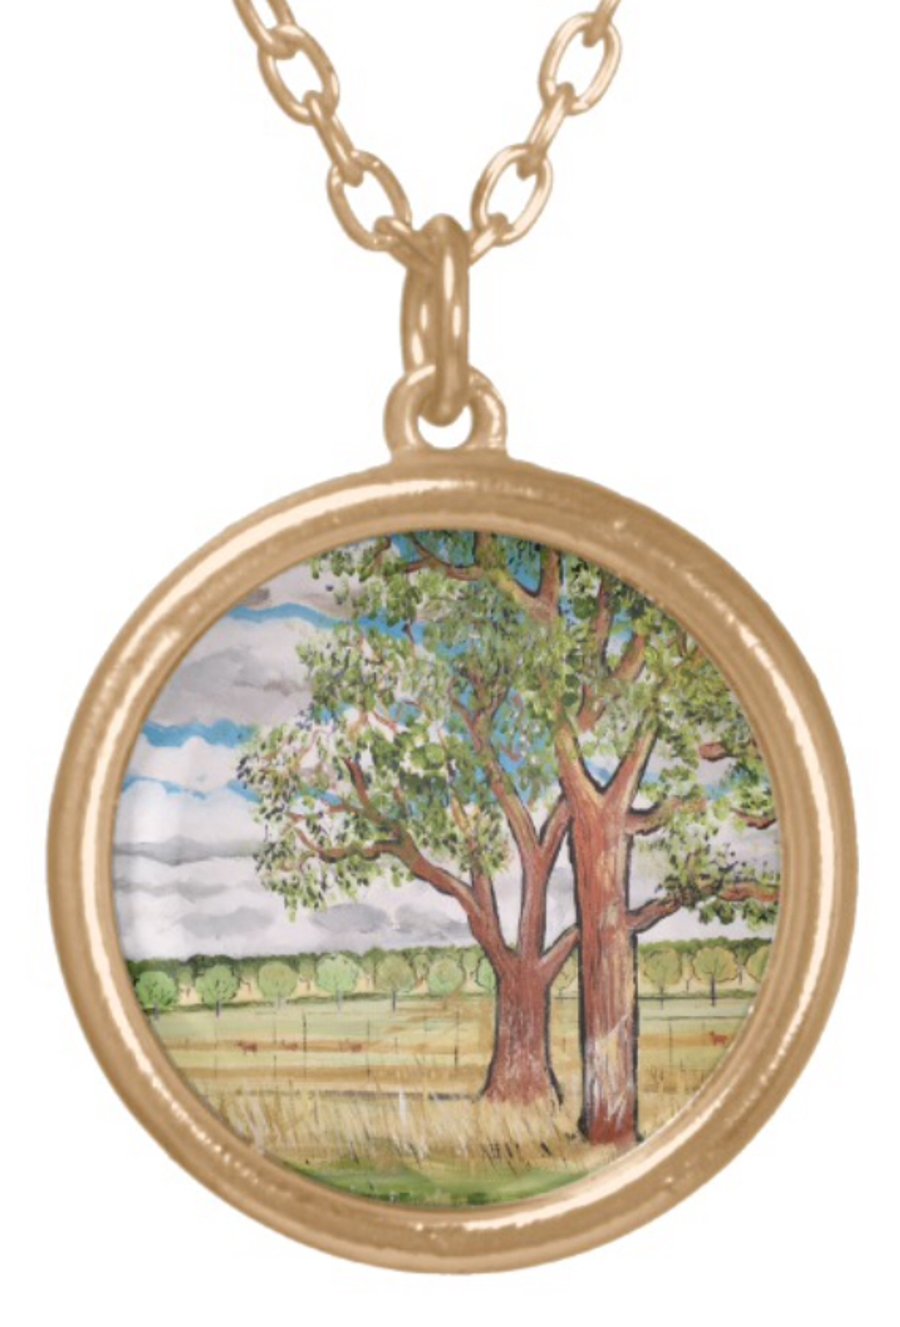 Beautiful Pendant featuring the design ‘The Answer Is Blowing In The Wind’